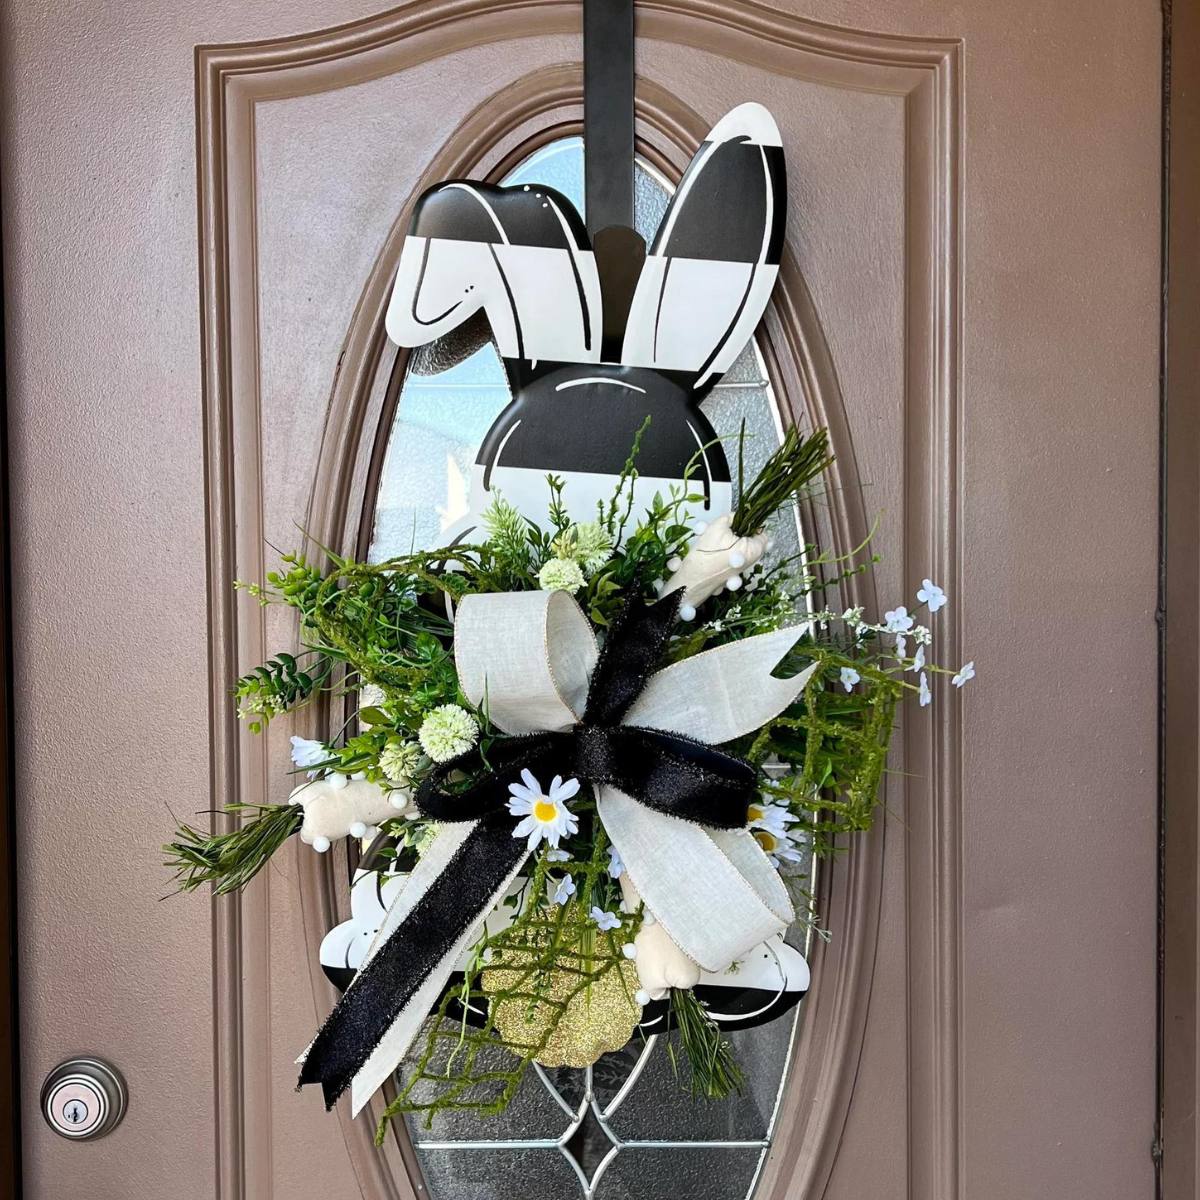 black and white striped metal bunny door hanger decorated with florals and a bow